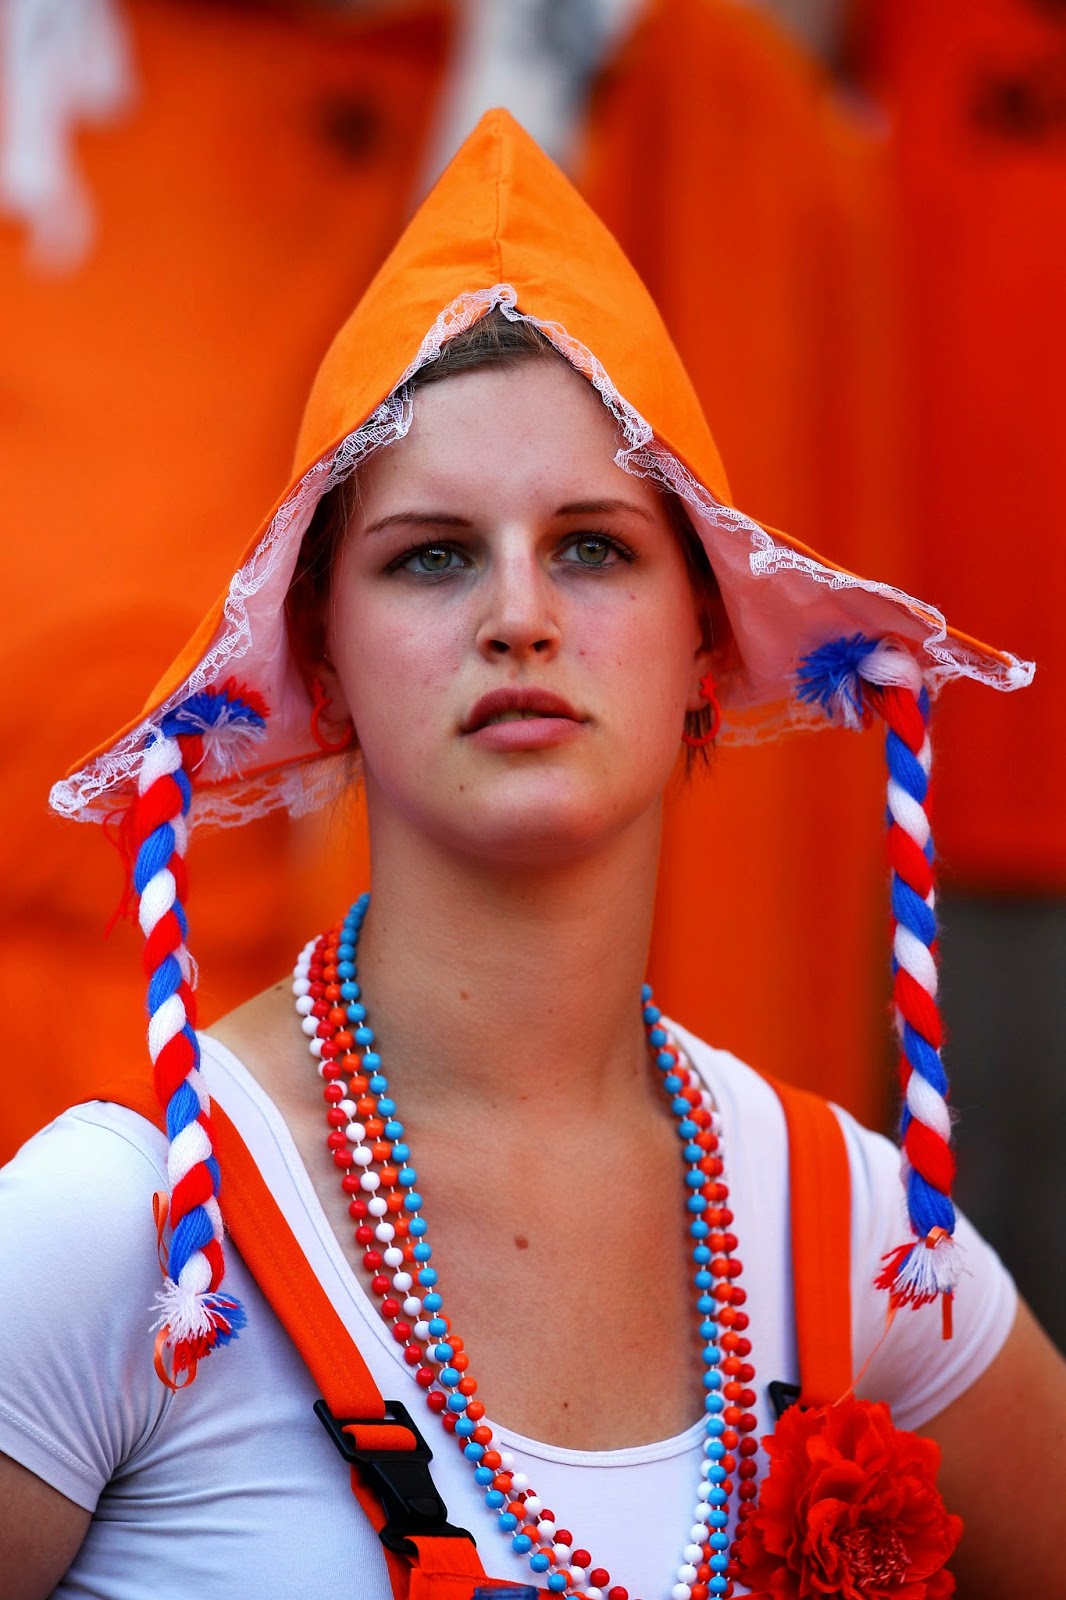 Sports Scandal: Netherlands in the last five World Cups 3rd time in